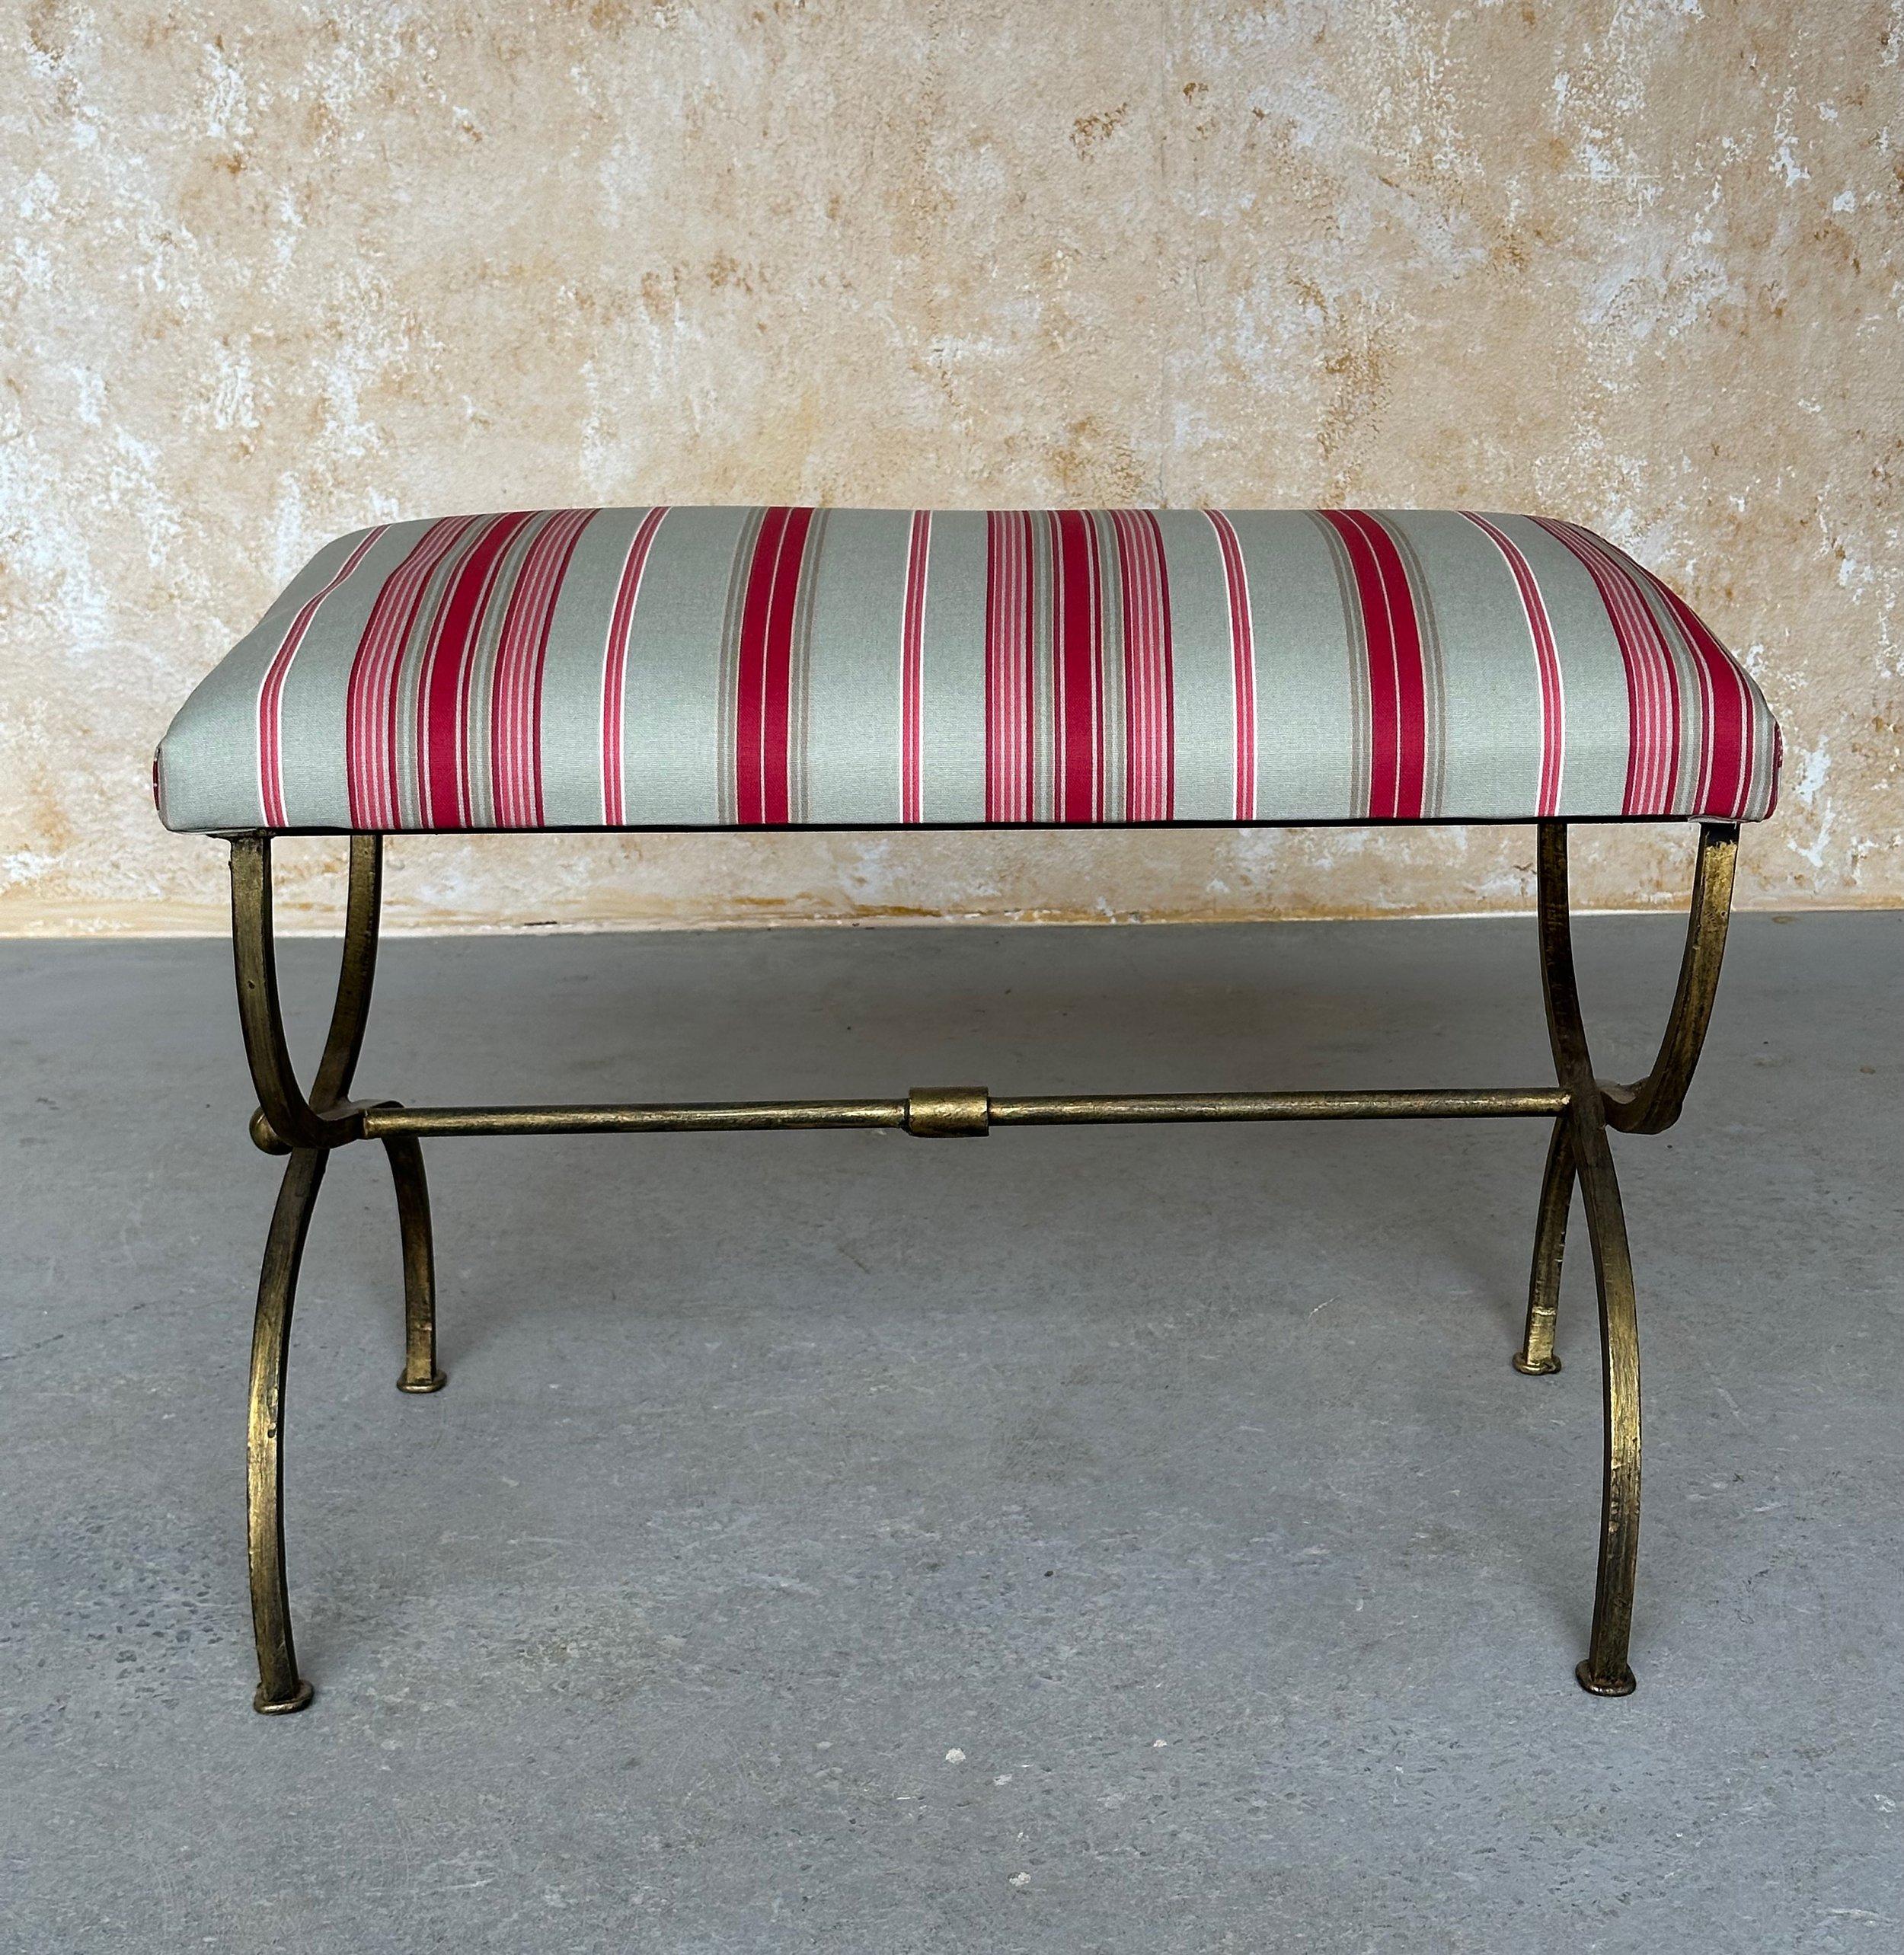 Spanish Iron Bench in Striped Fabric In Good Condition For Sale In Buchanan, NY